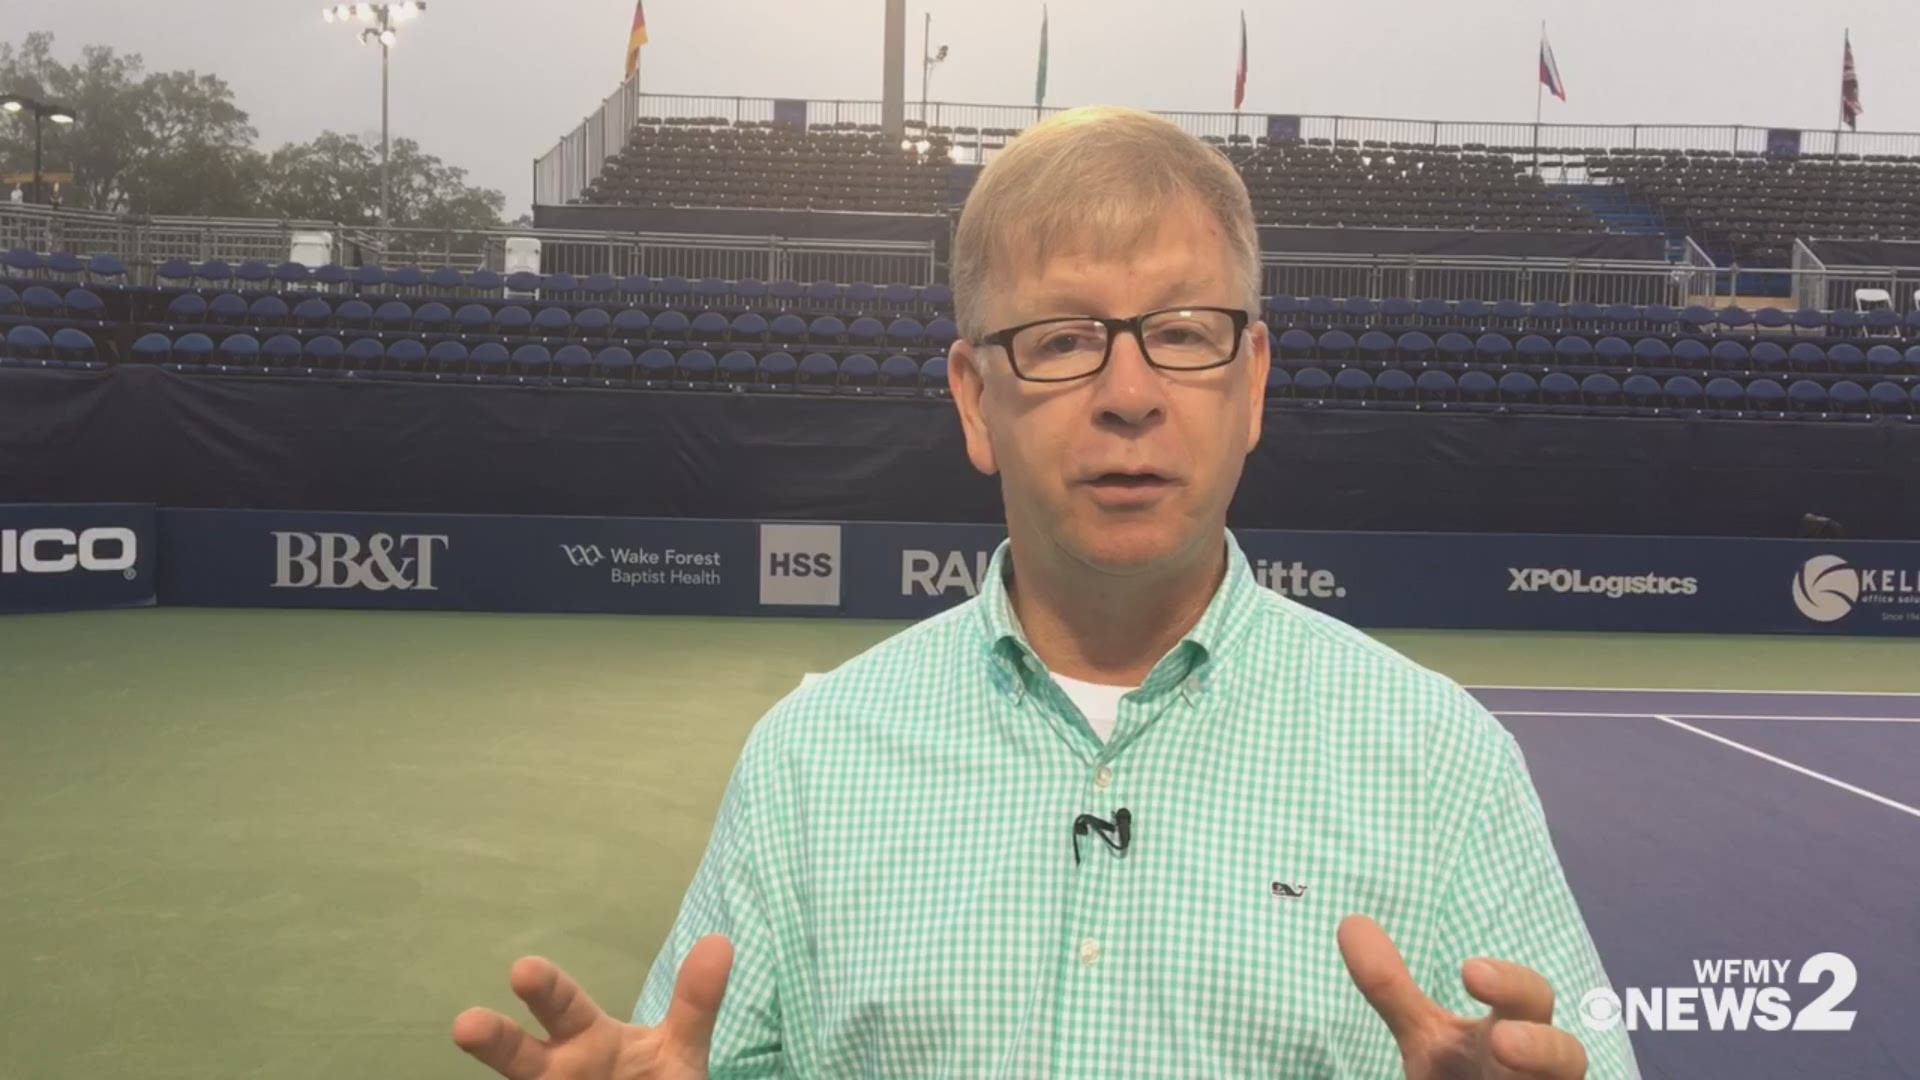 The Winston-Salem Open strives to give tennis fans a more intimate experience and see the world's best players.